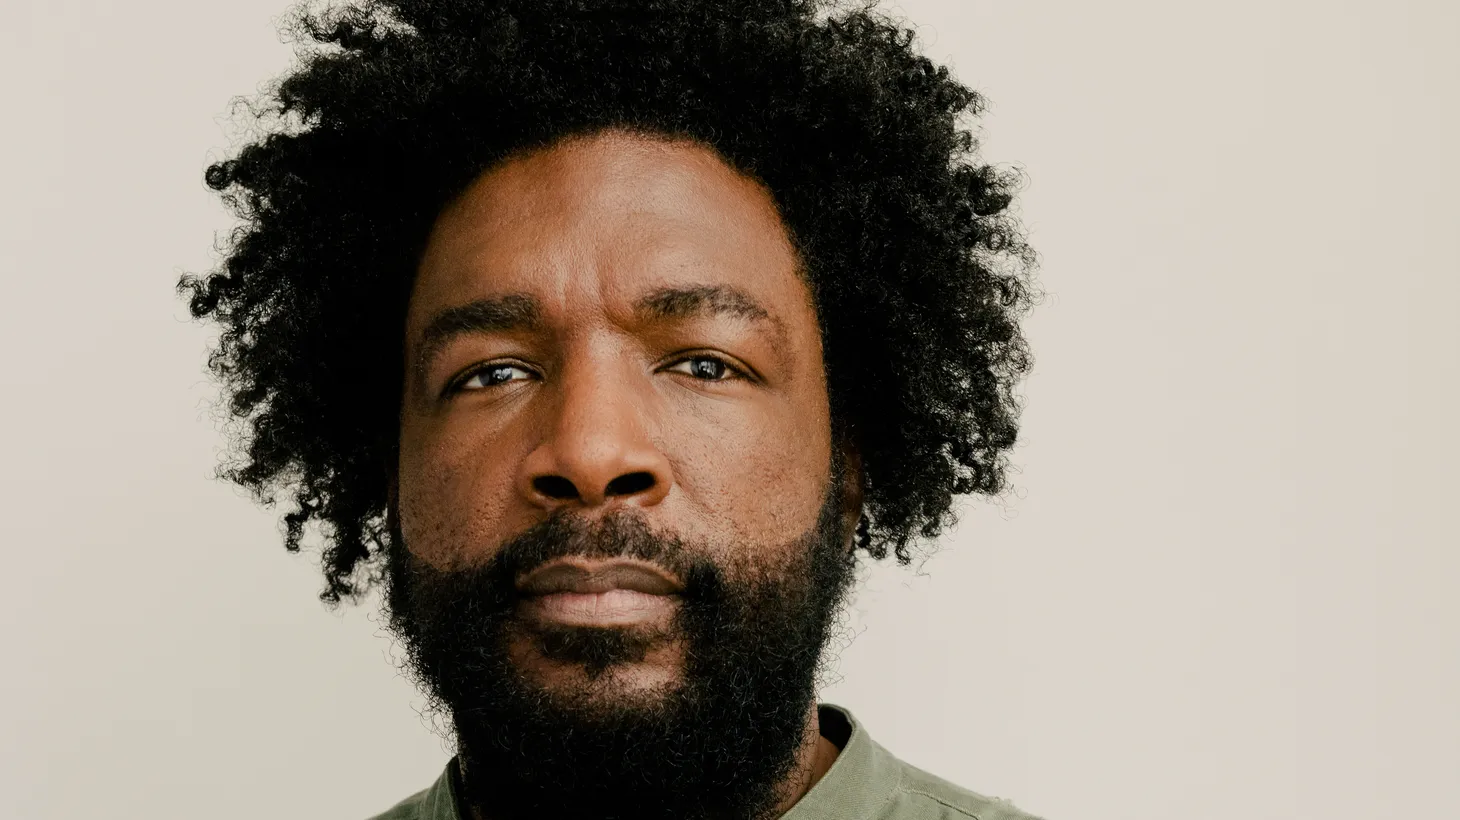 Questlove opens up about directing the acclaimed new documentary “Summer of Soul.”